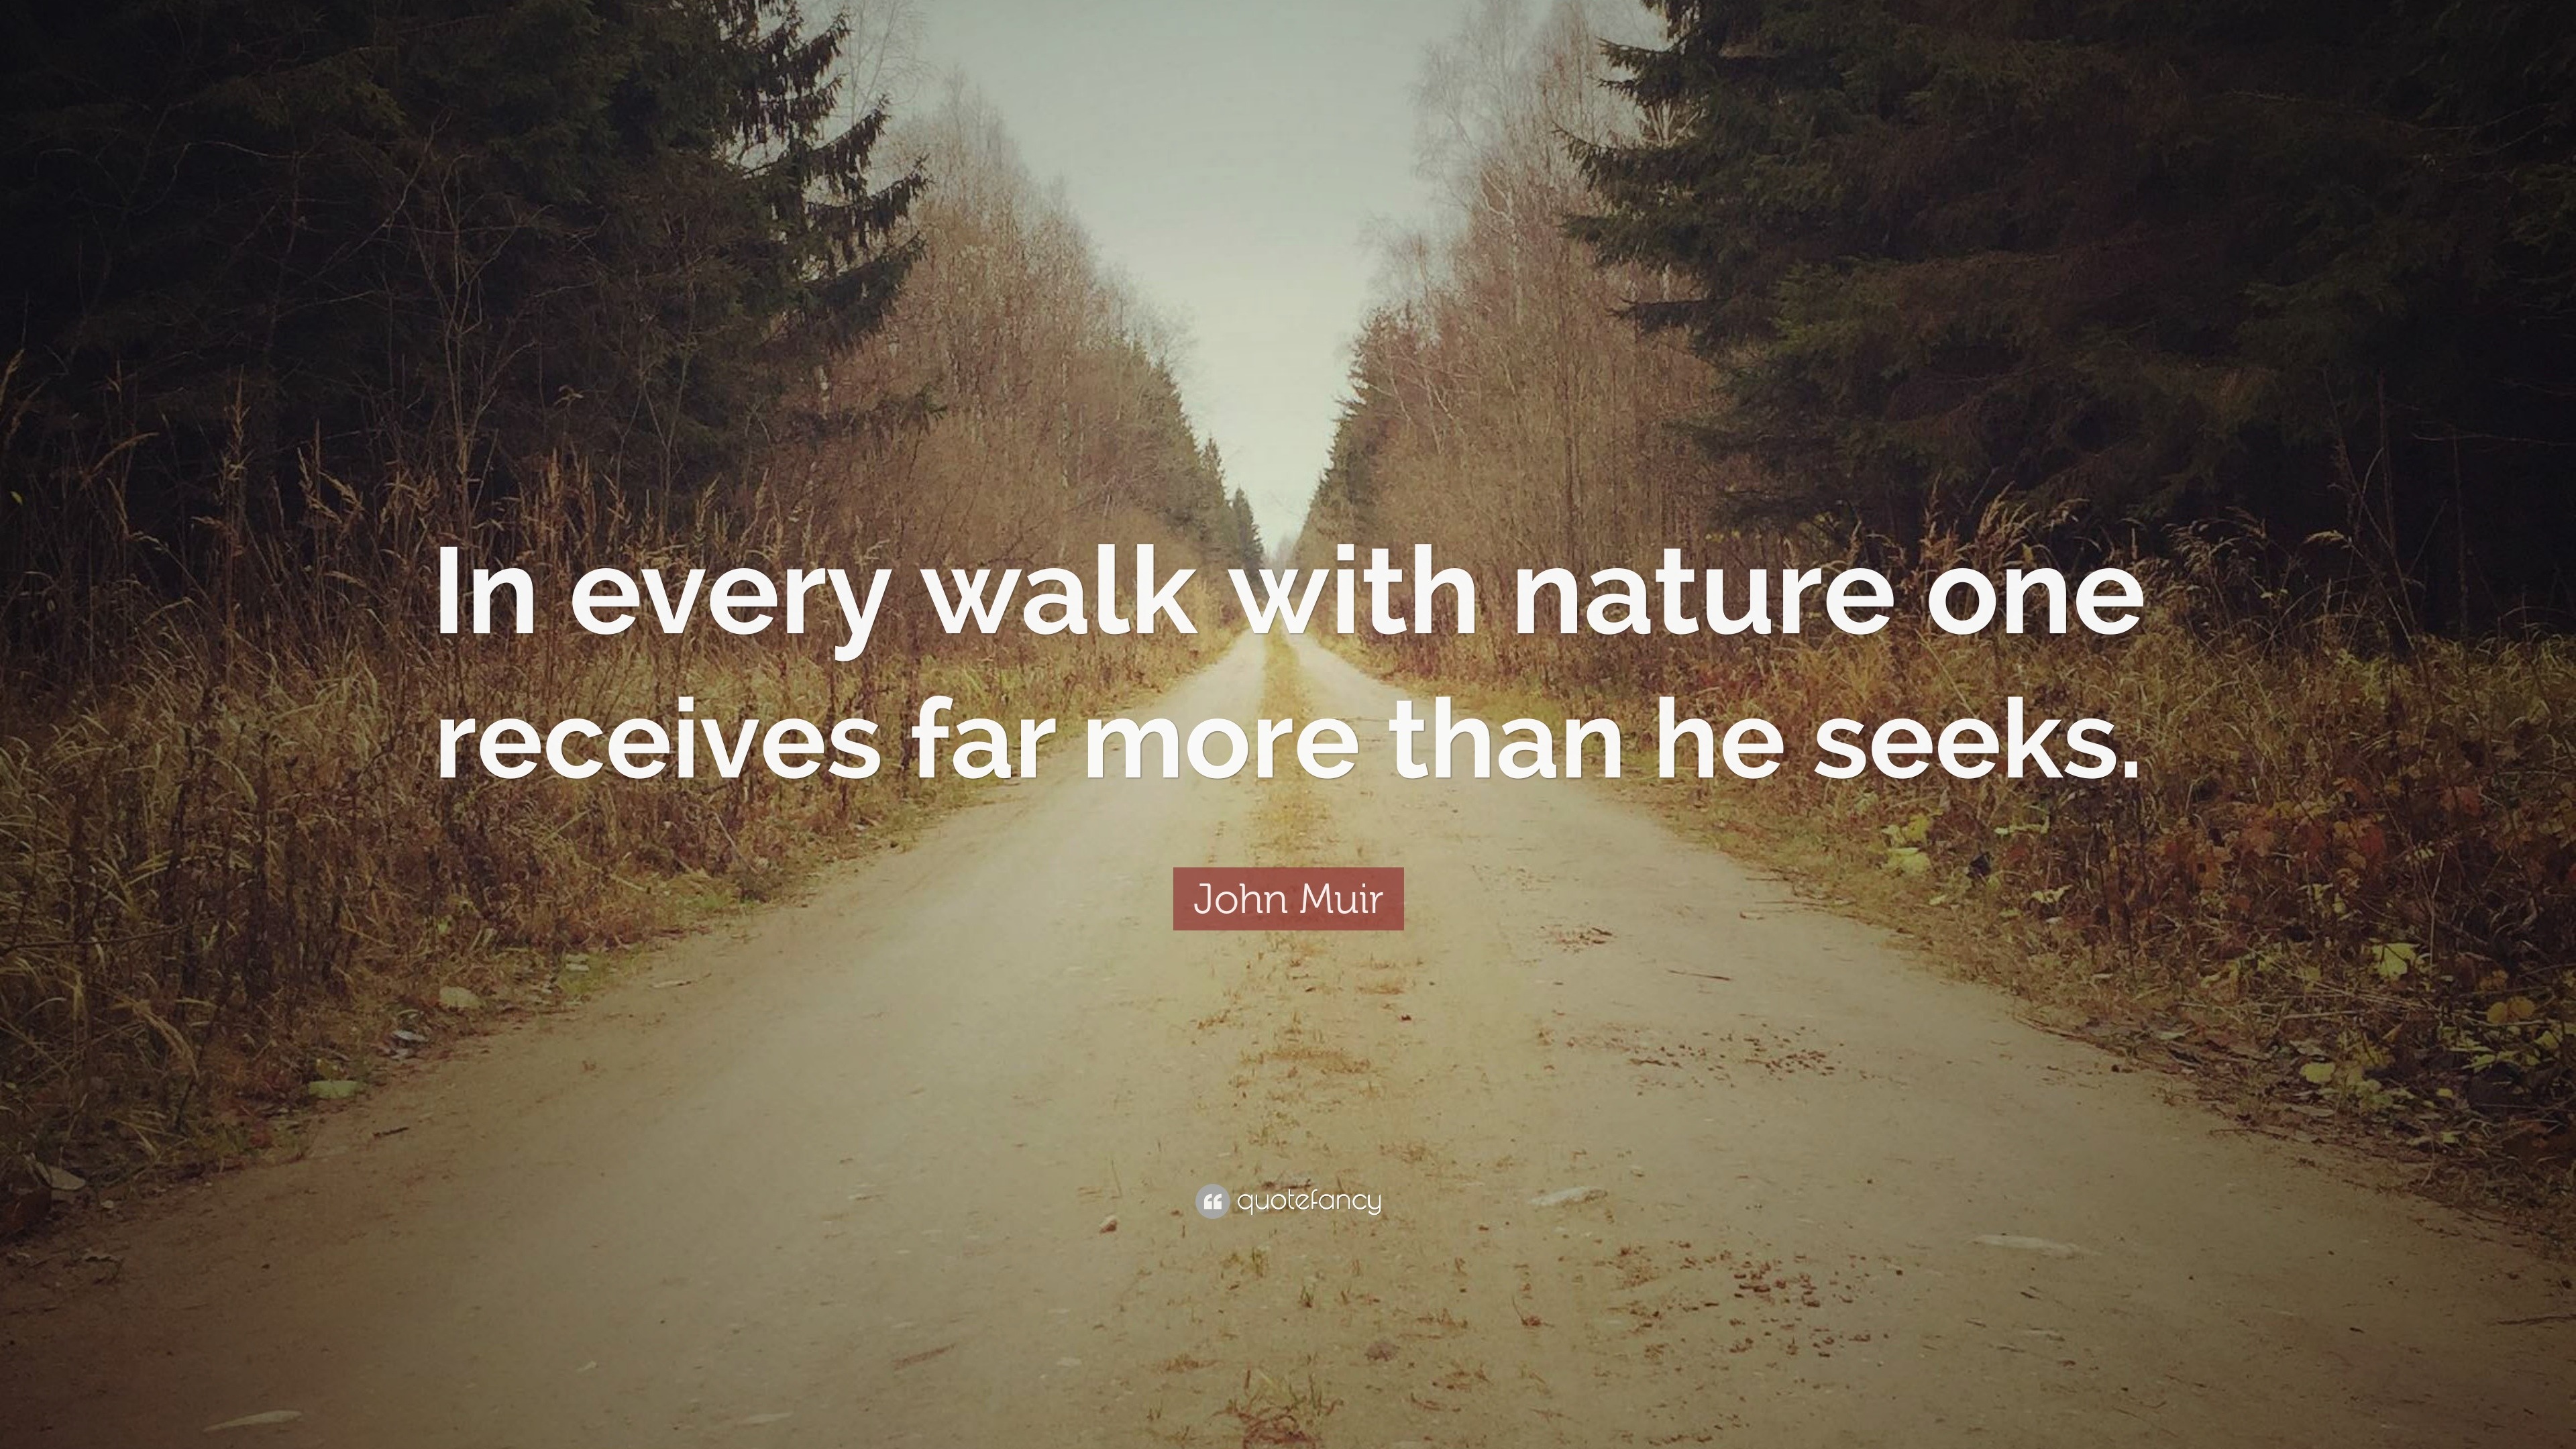 59857 John Muir Quote In every walk with nature one receives far more